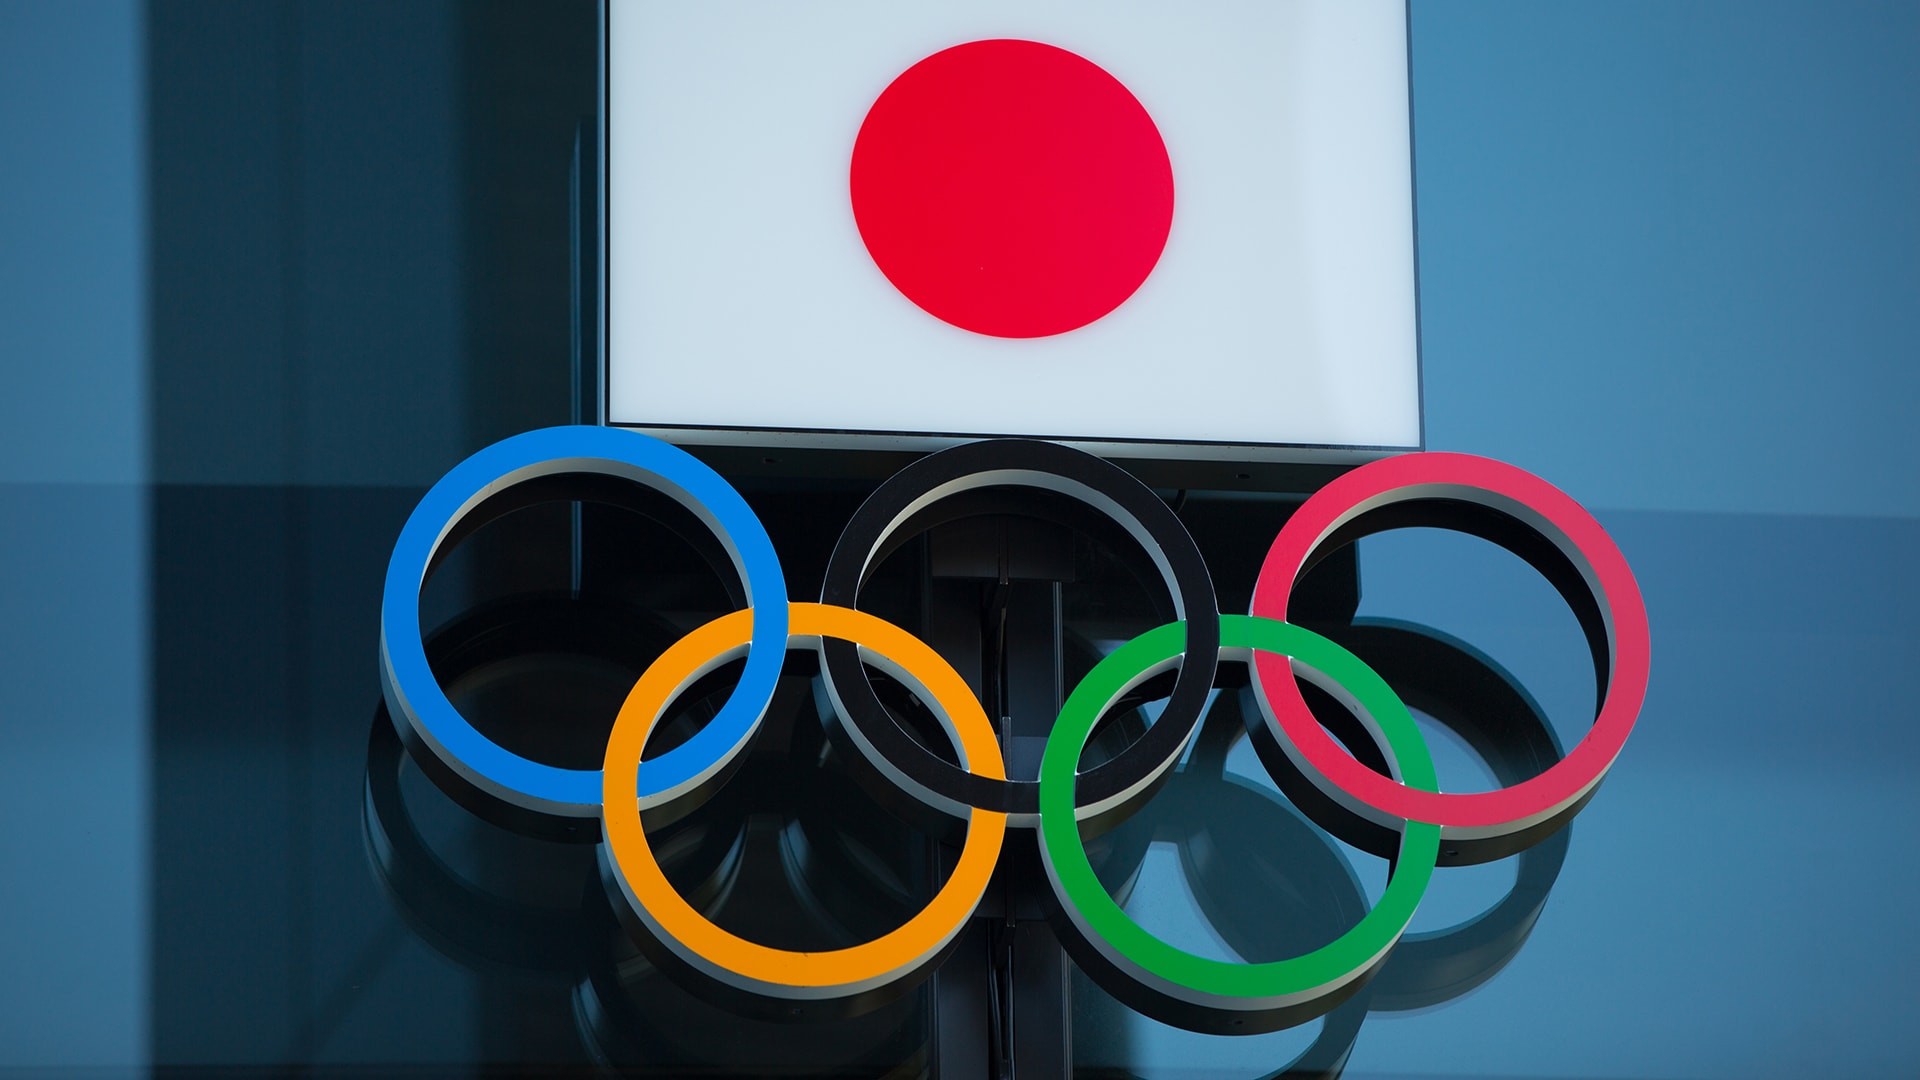 Government announced its proposal for anti-coronavirus measures to Compete in Tokyo Olympics